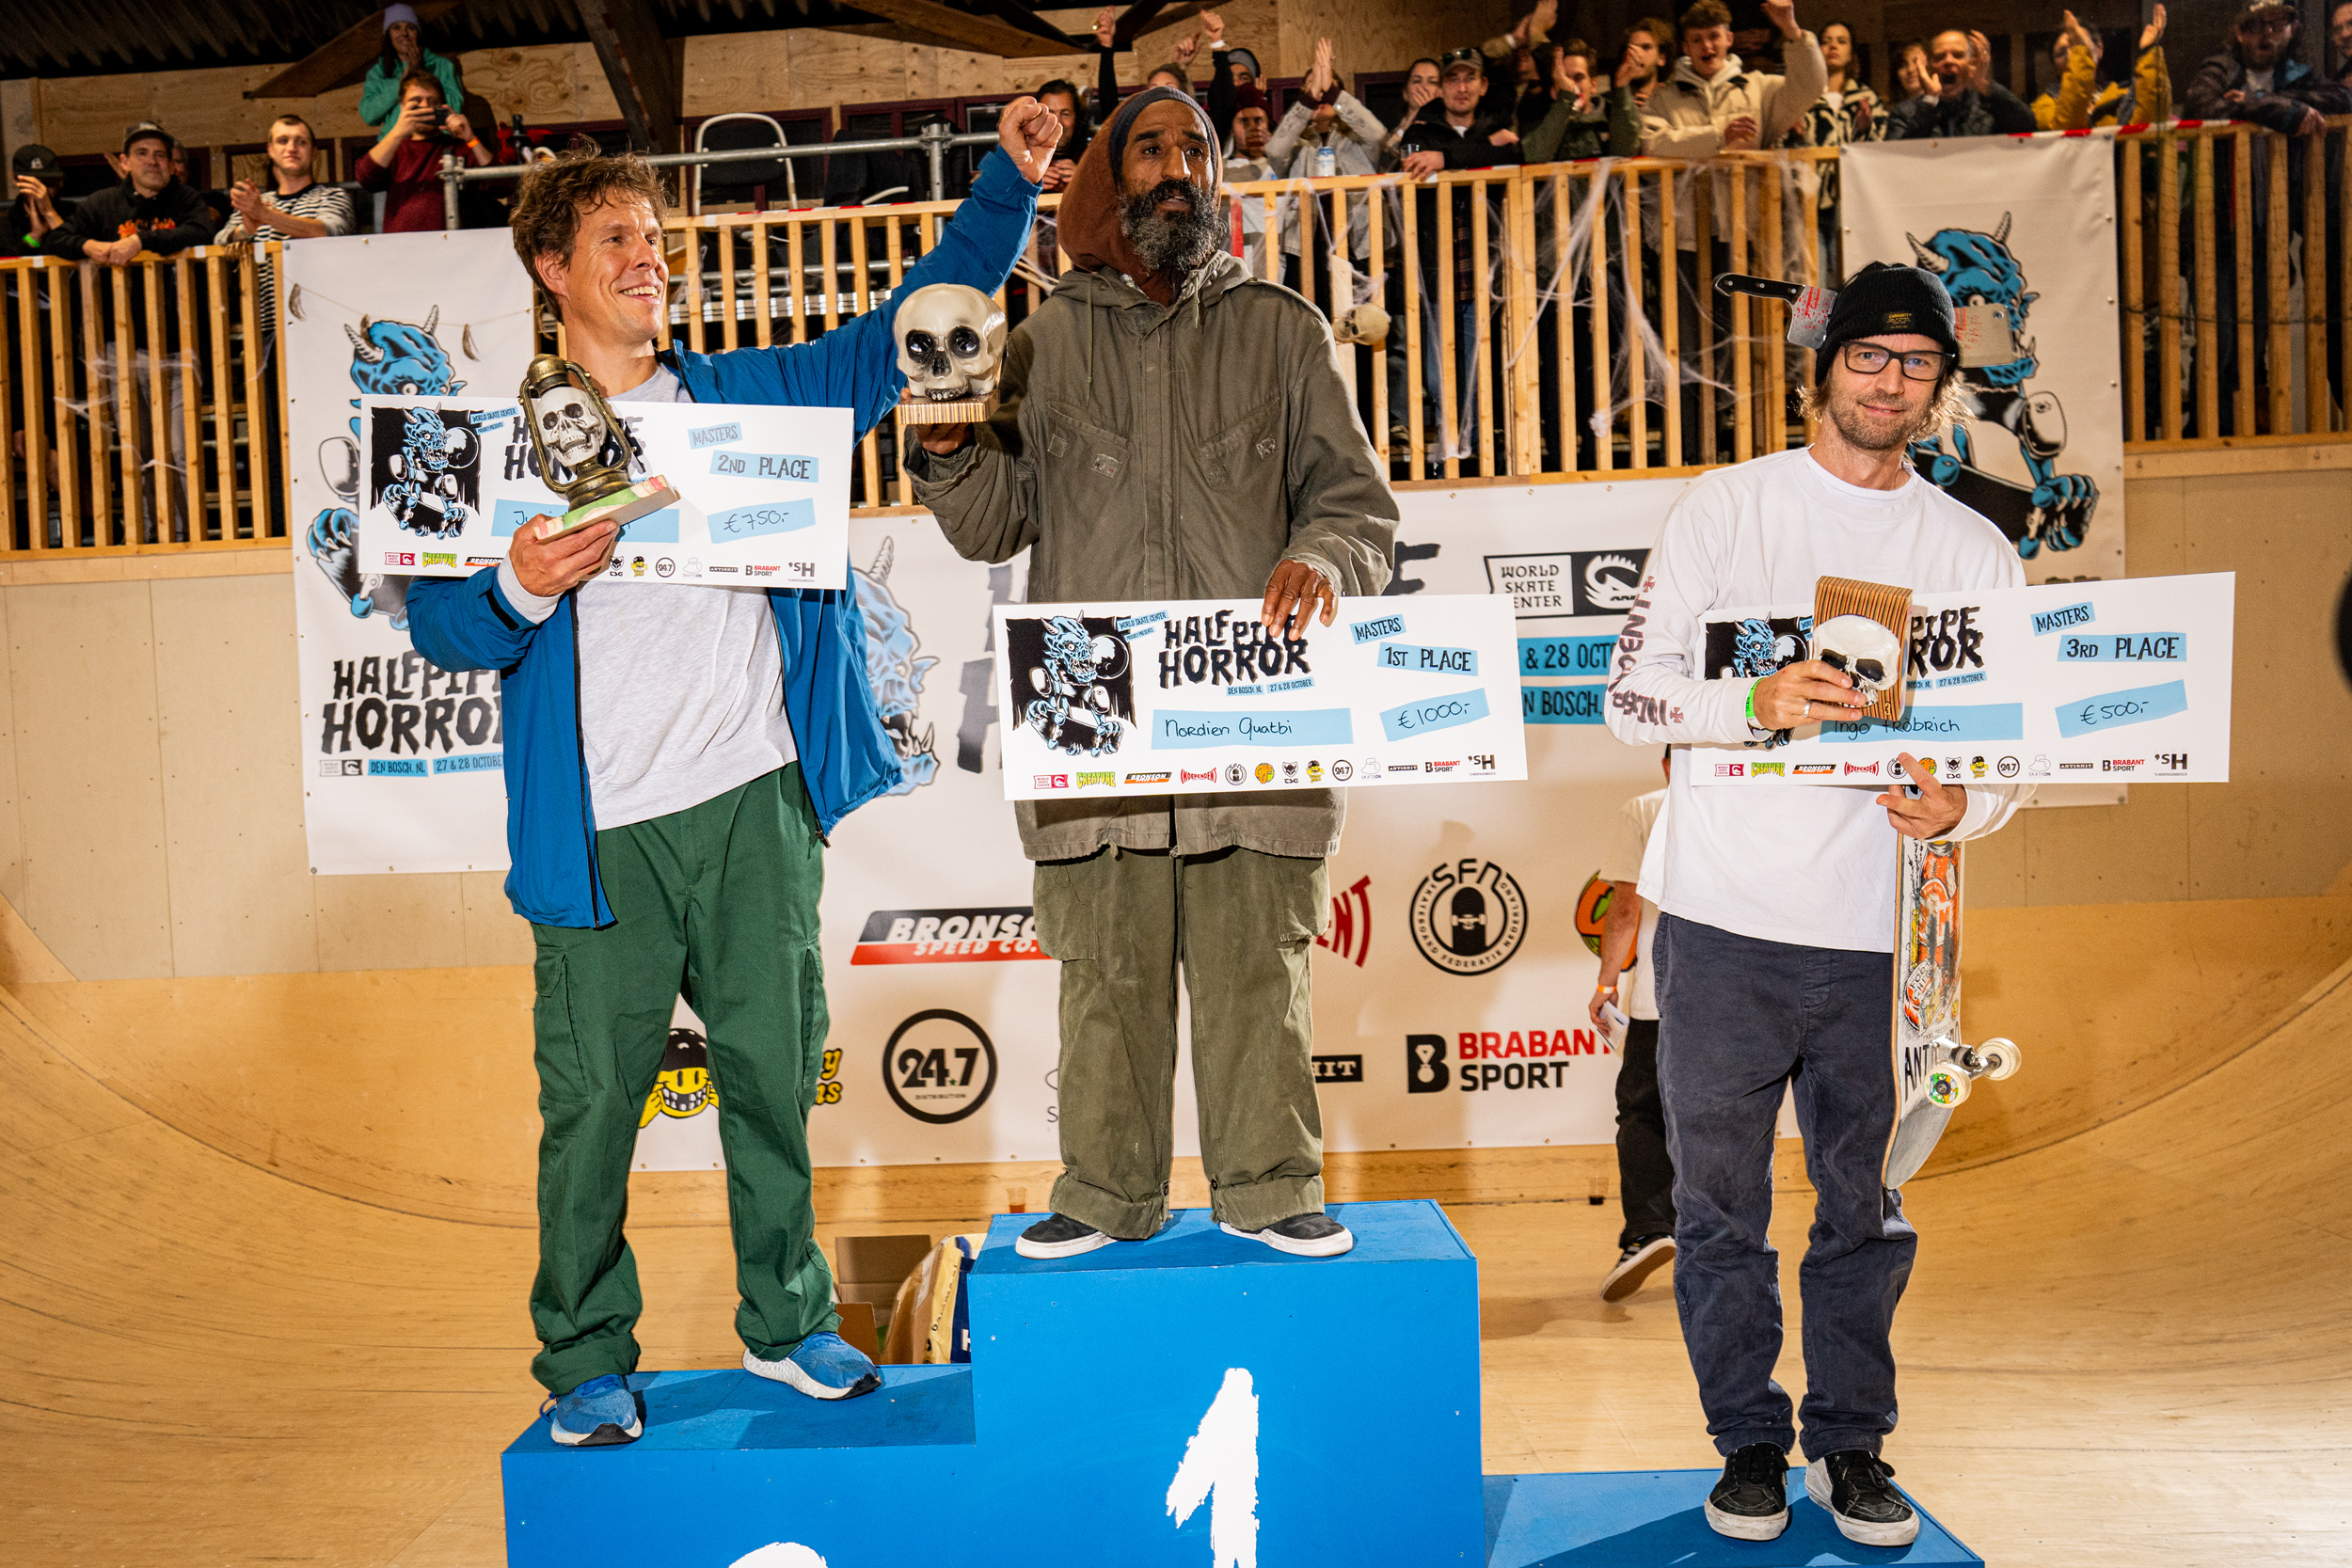 Winners Masters at Halfpipe Horror 2023 at World Skate Center 2023